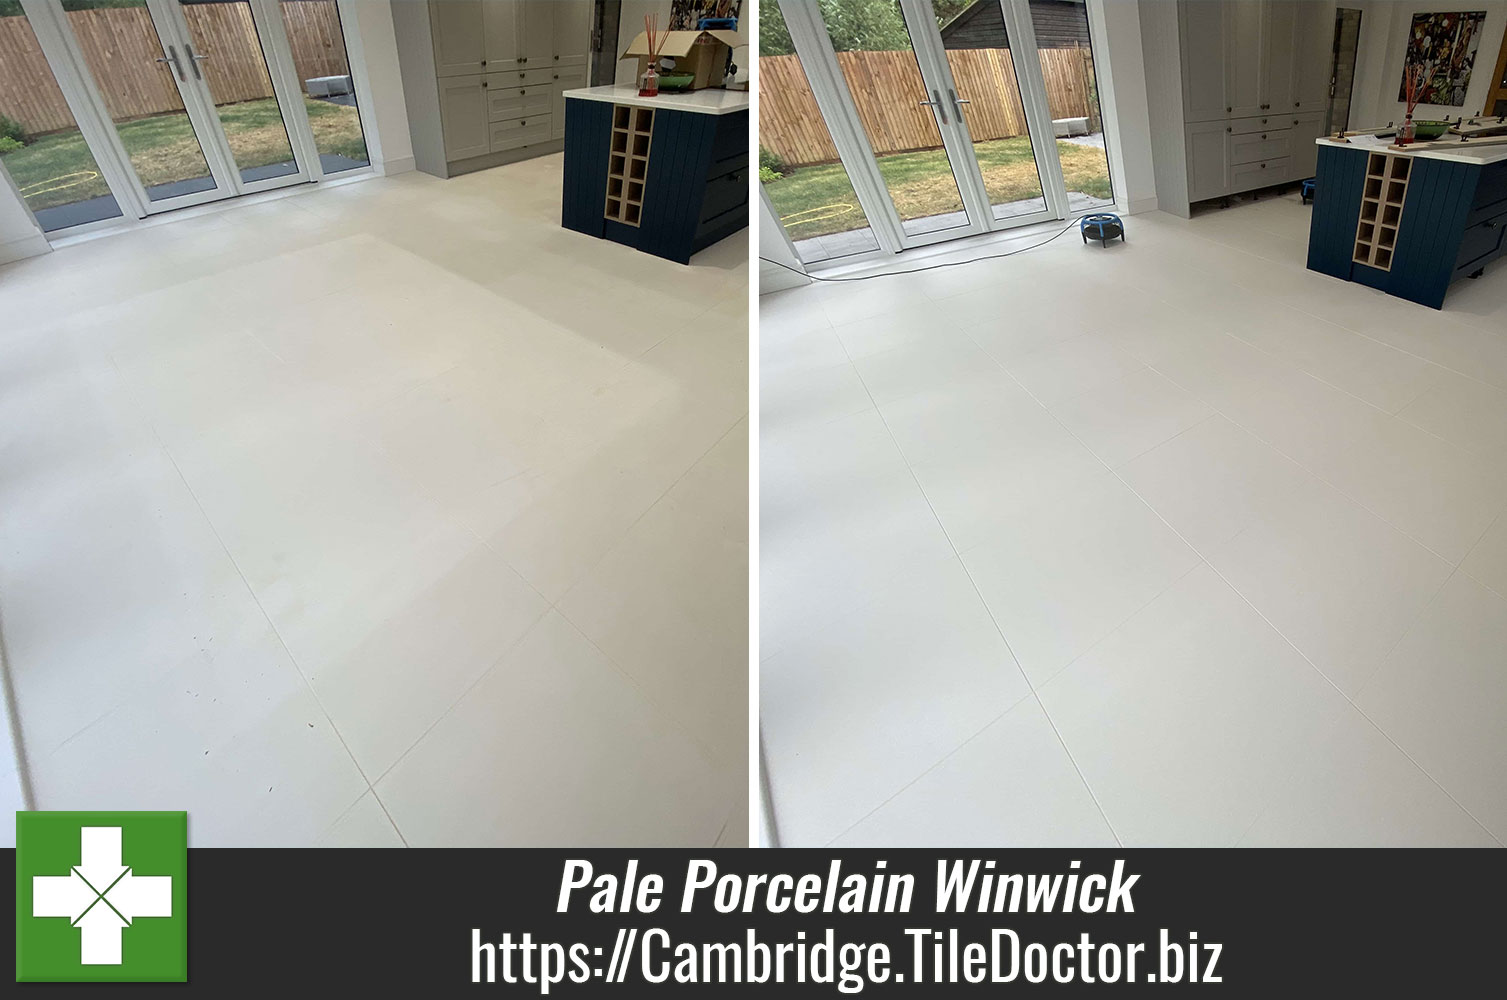 Removing Grout Haze from Porcelain Tiles with Tile Doctor Grout Clean-up